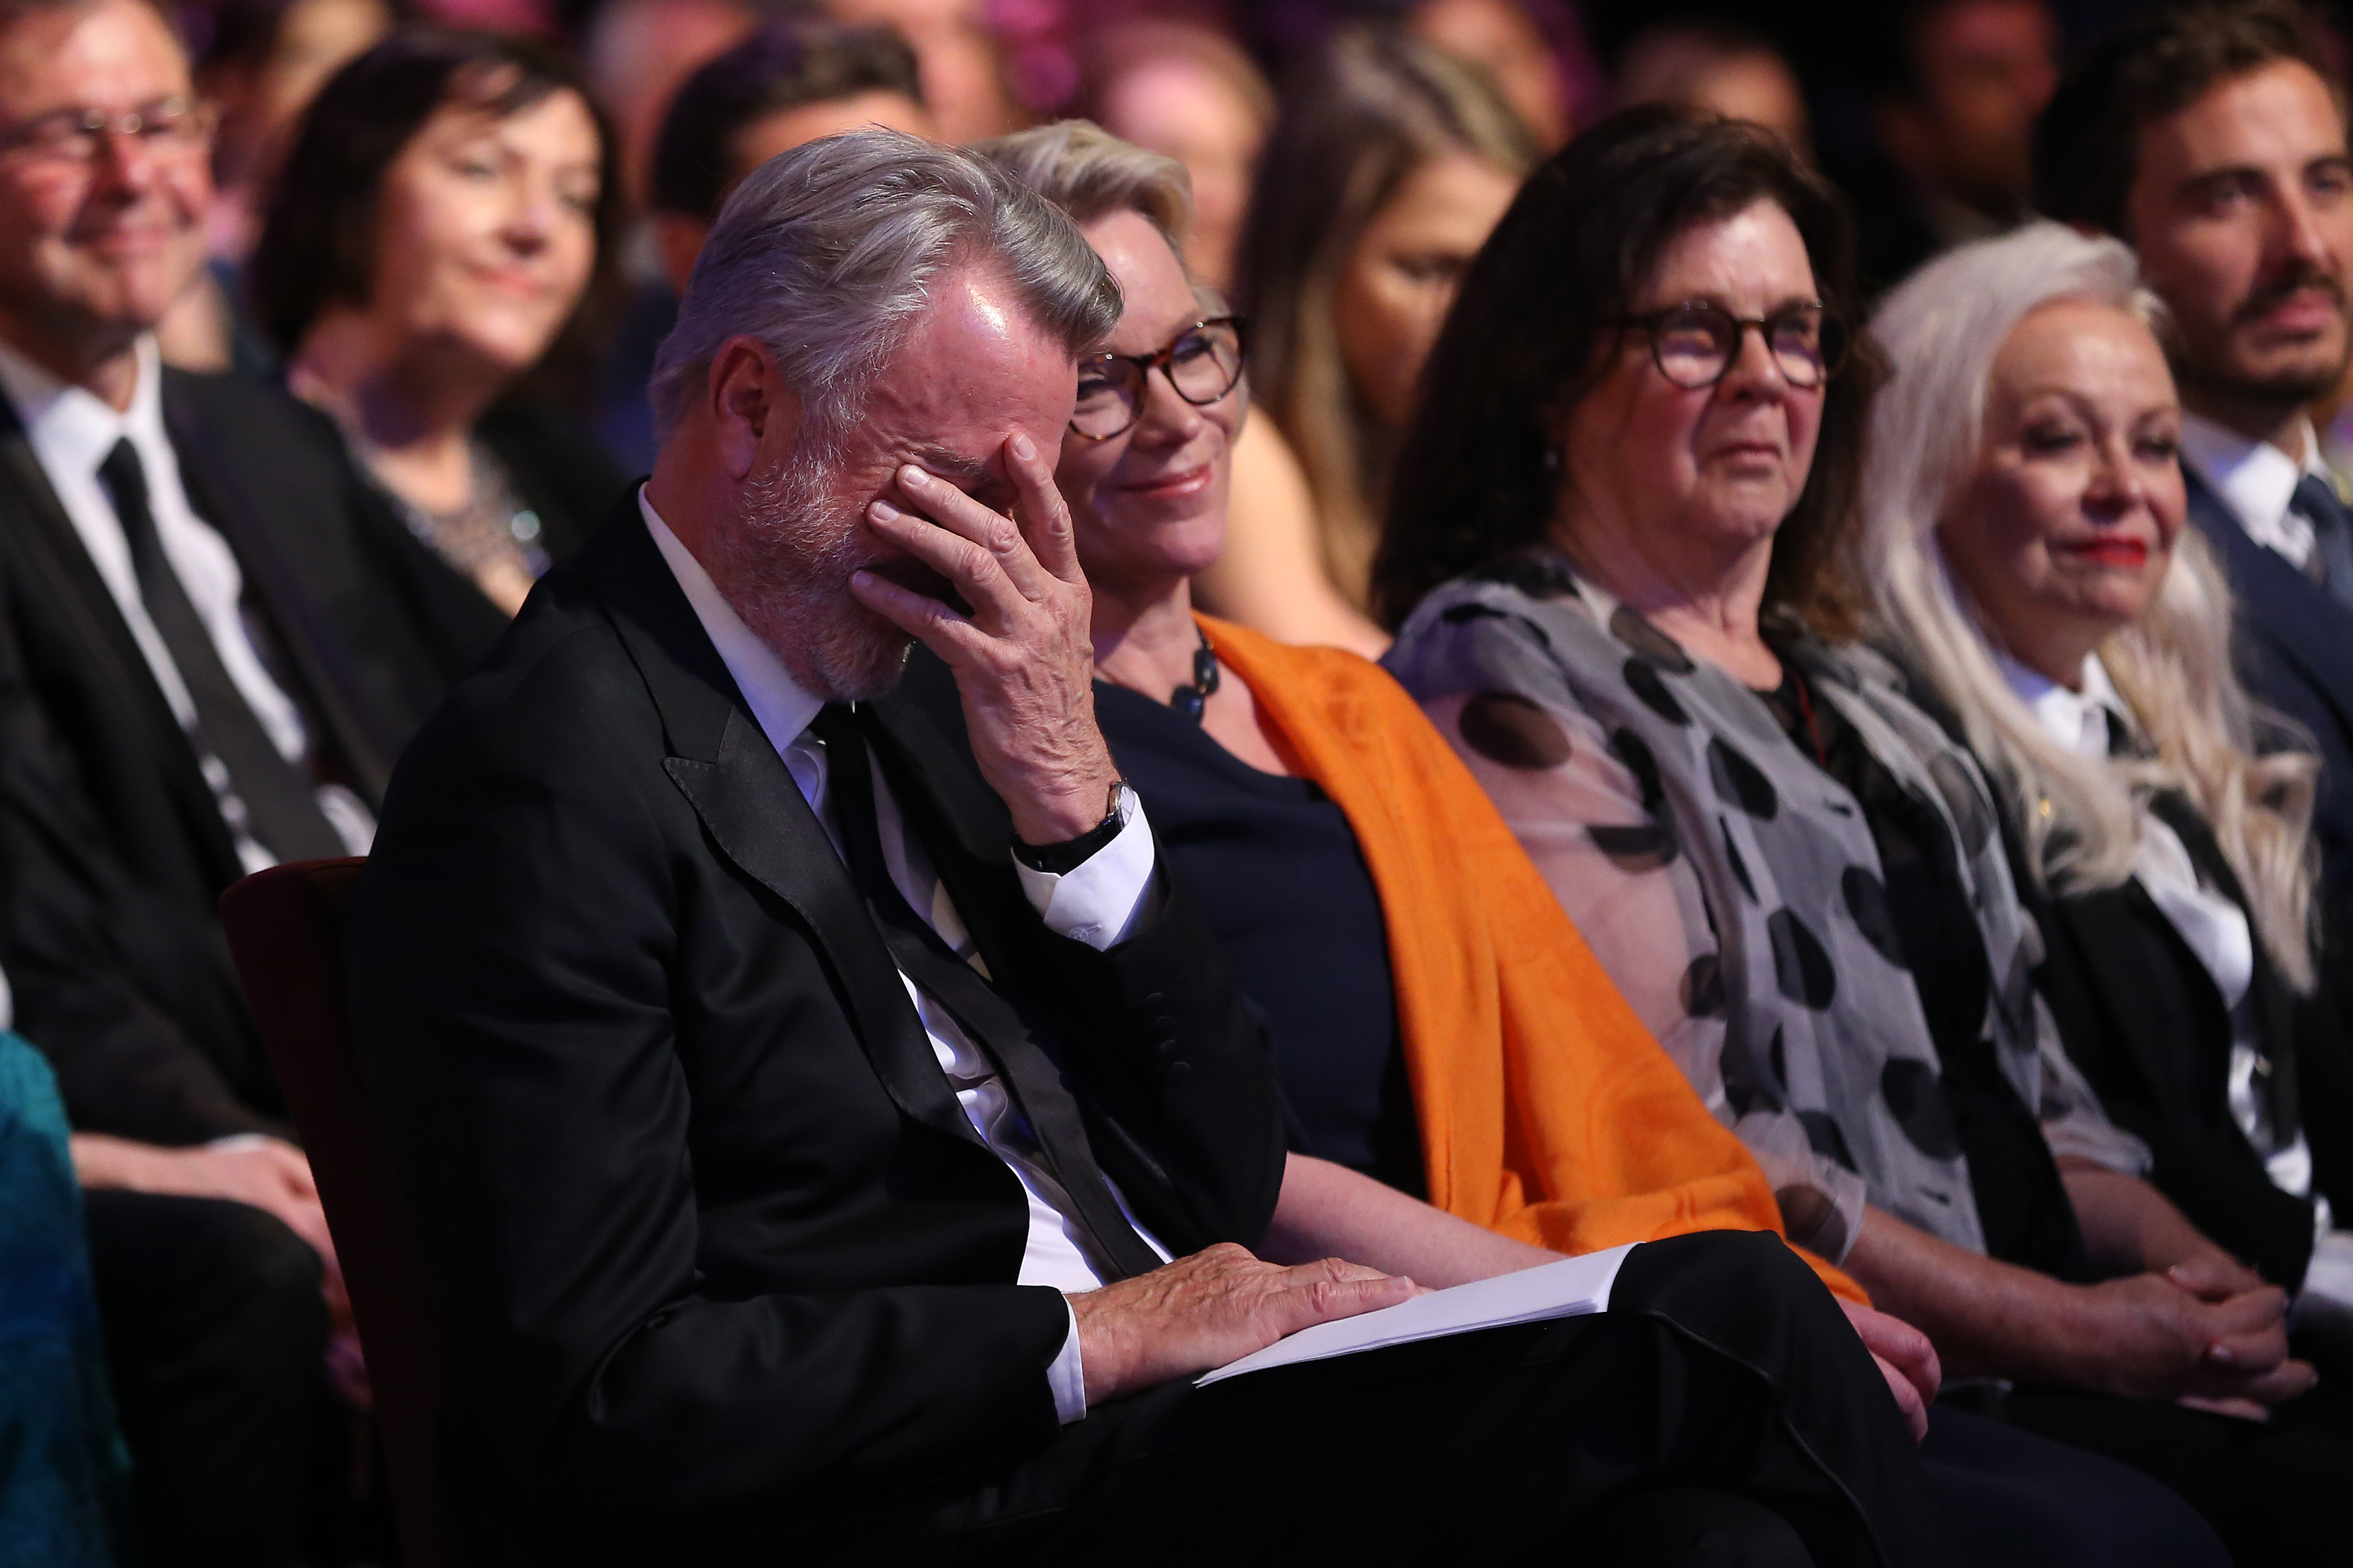 Sam Neill sitting alongside Laura Tingle during the 2019 AACTA Awards at The Star on December 4, 2019 in Sydney, Australia | Source: Getty Images